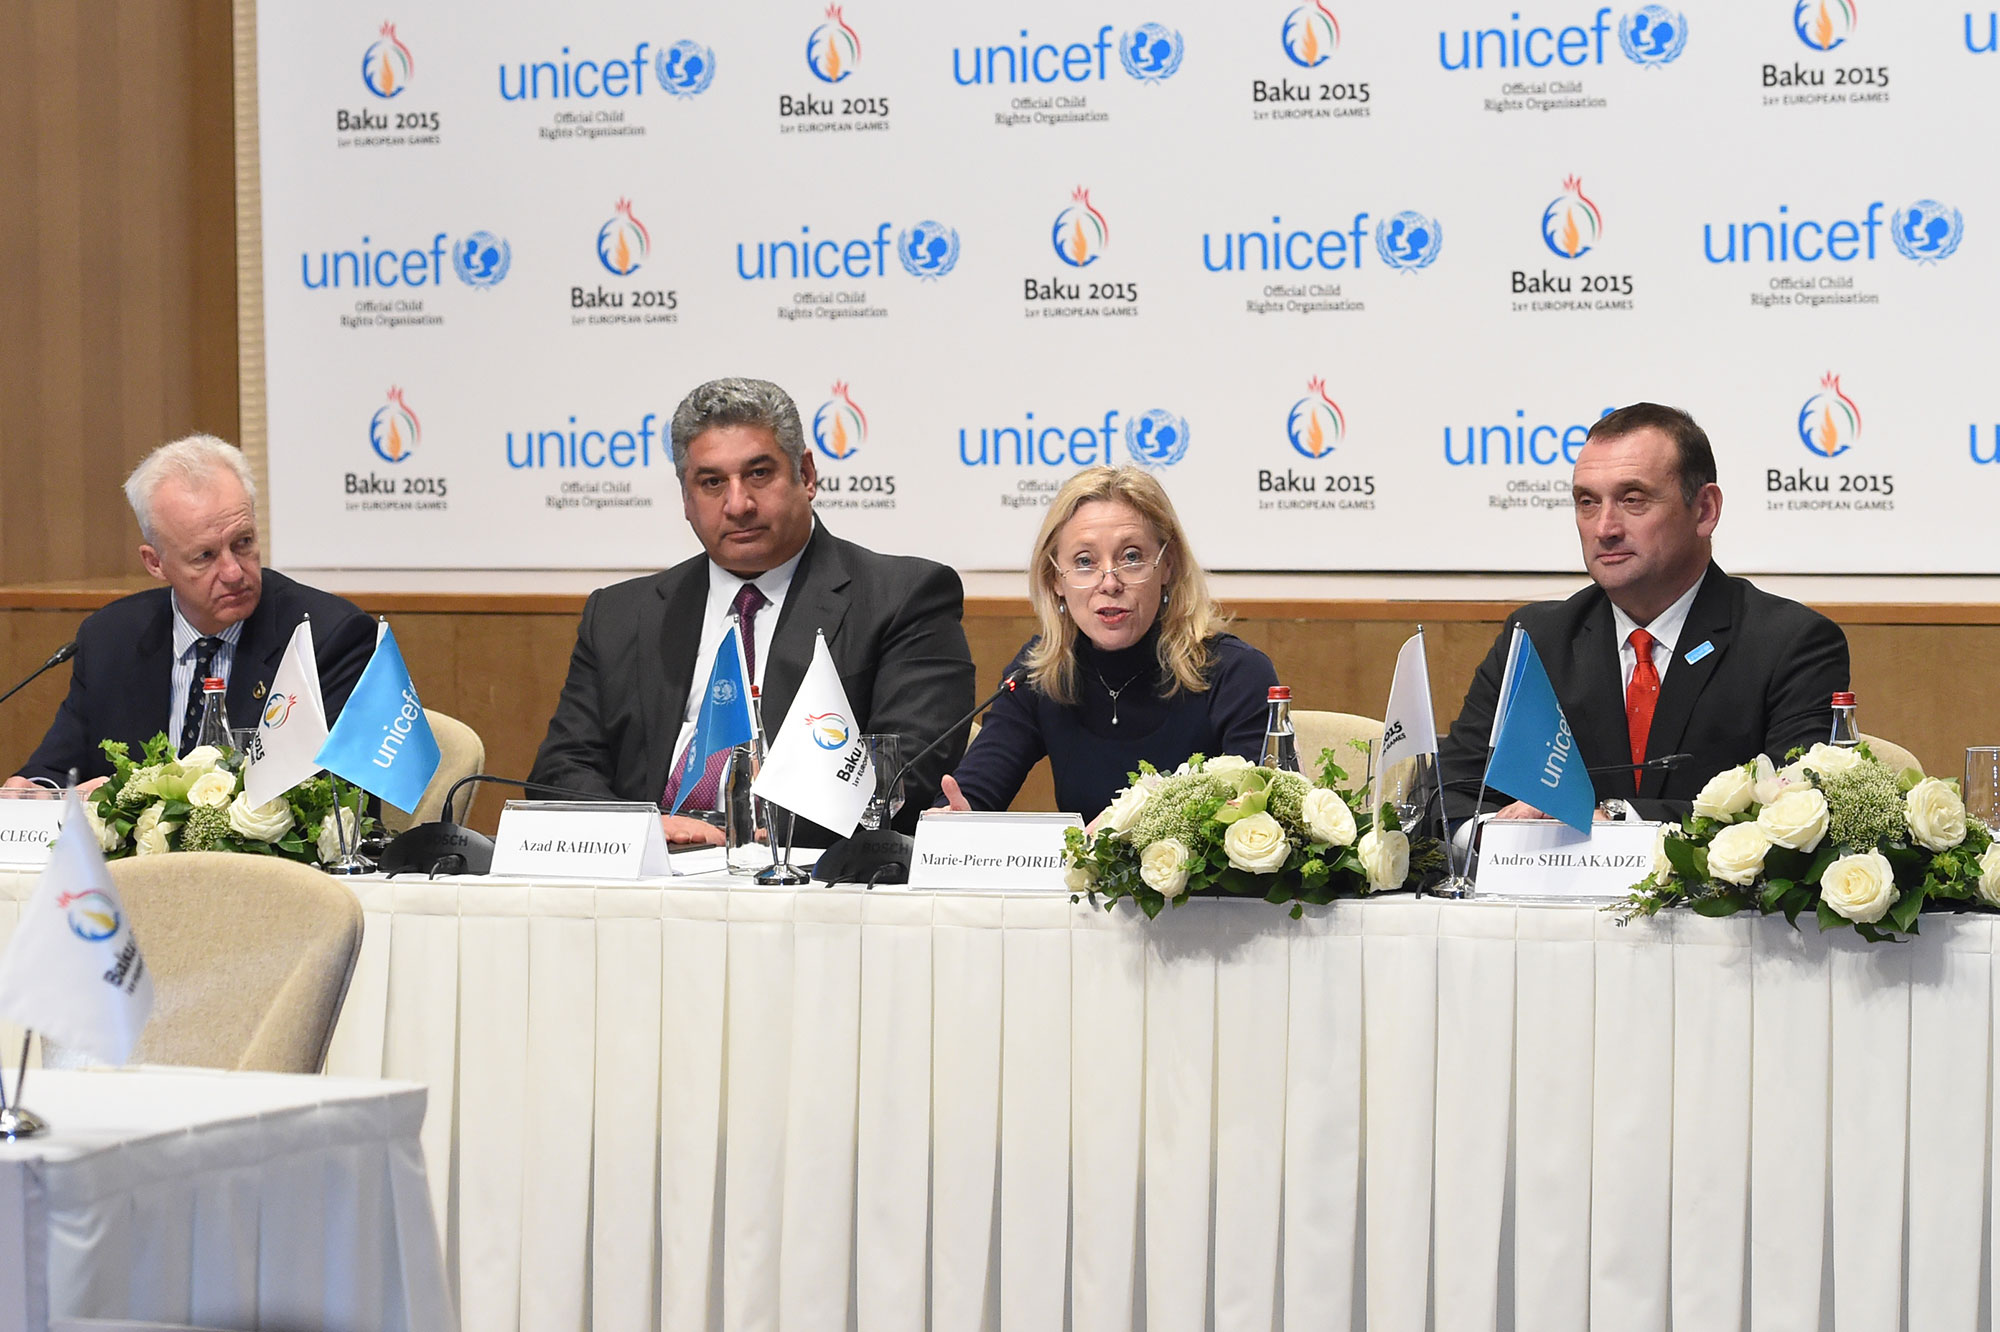 Among those present at the signing event between Baku 2015 and UNICEF were Azad Rahimov, Azerbaijan’s Minister of Youth and Sports and Baku 2015 chief executive, and Marie-Pierre Poirier, UNICEF Regional Director for Europe and Central Asia, ©Baku2015